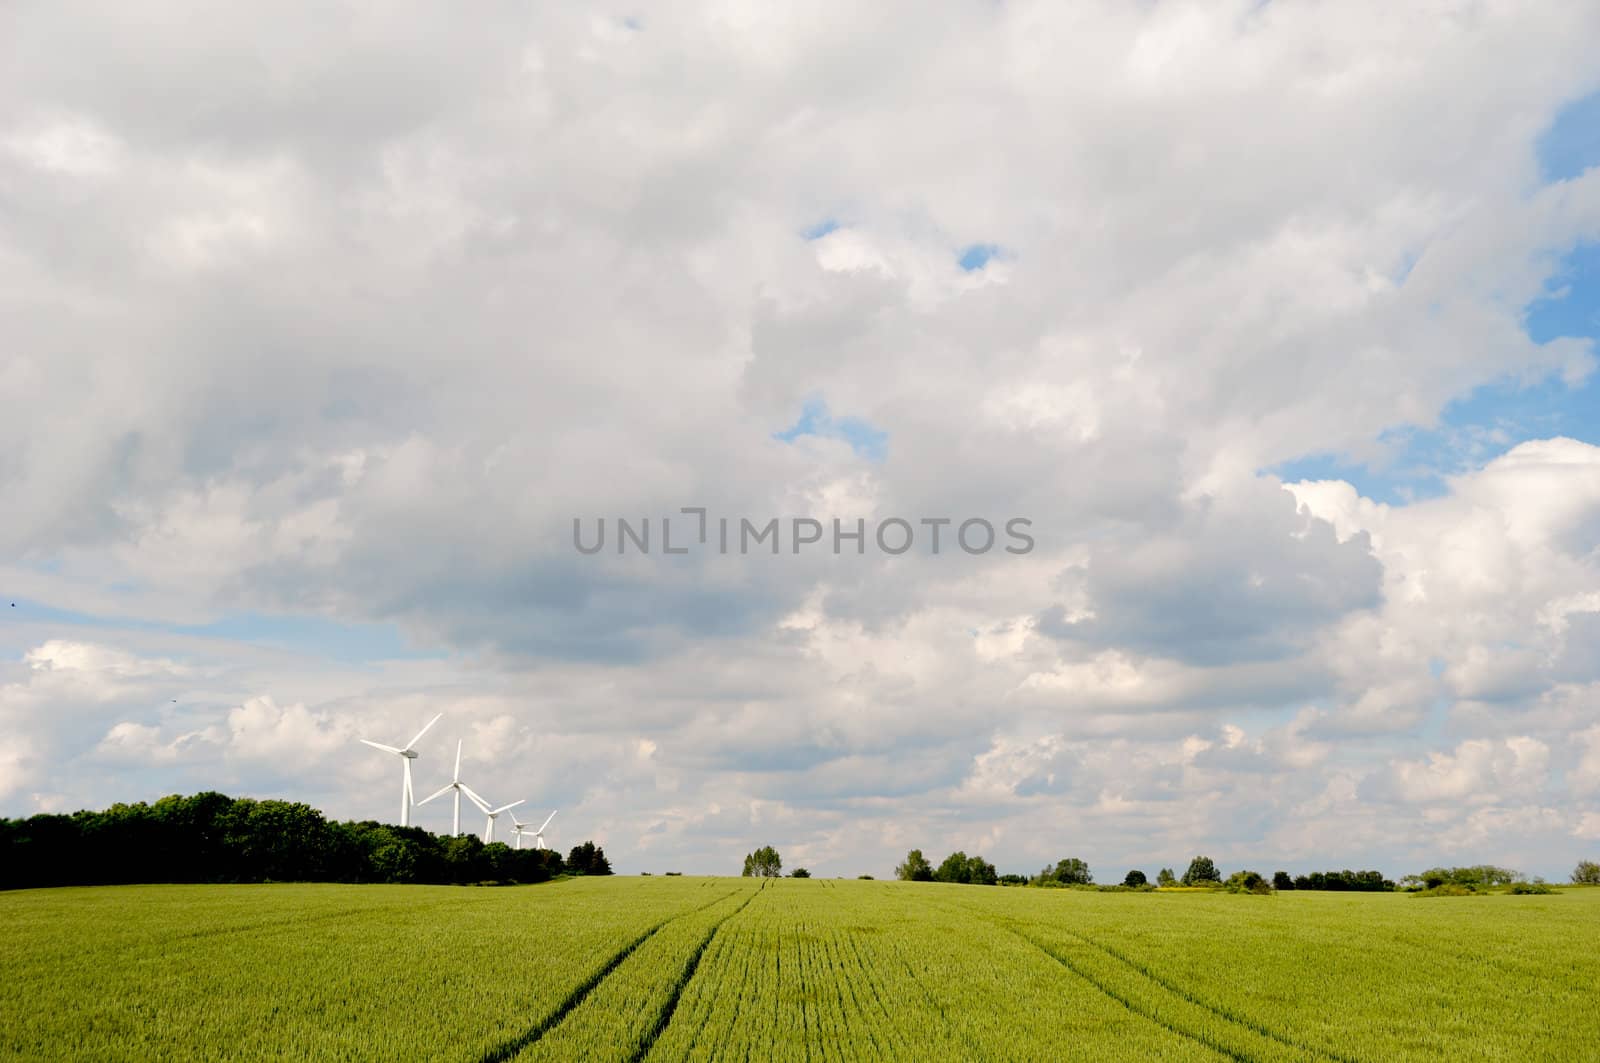 Landscape and wind turbines by cfoto